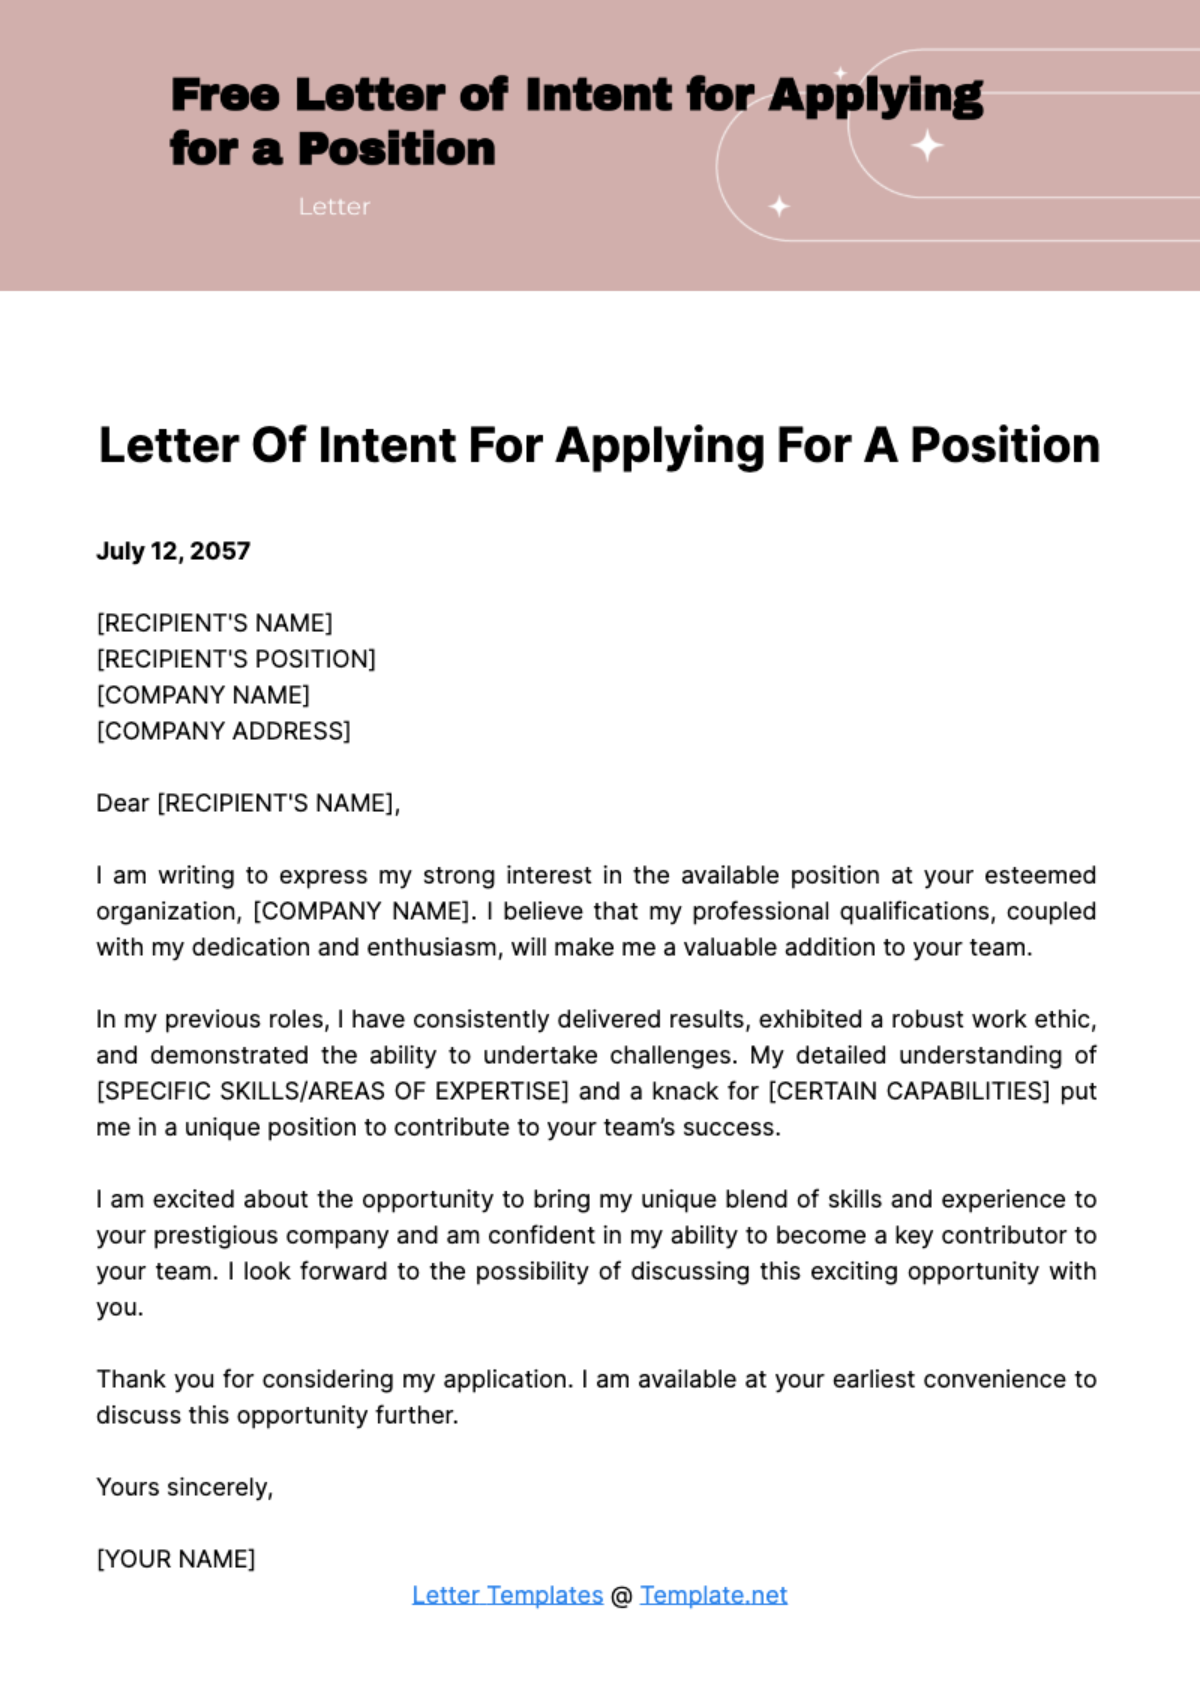 Free Letter of Intent for Applying for a Position Template